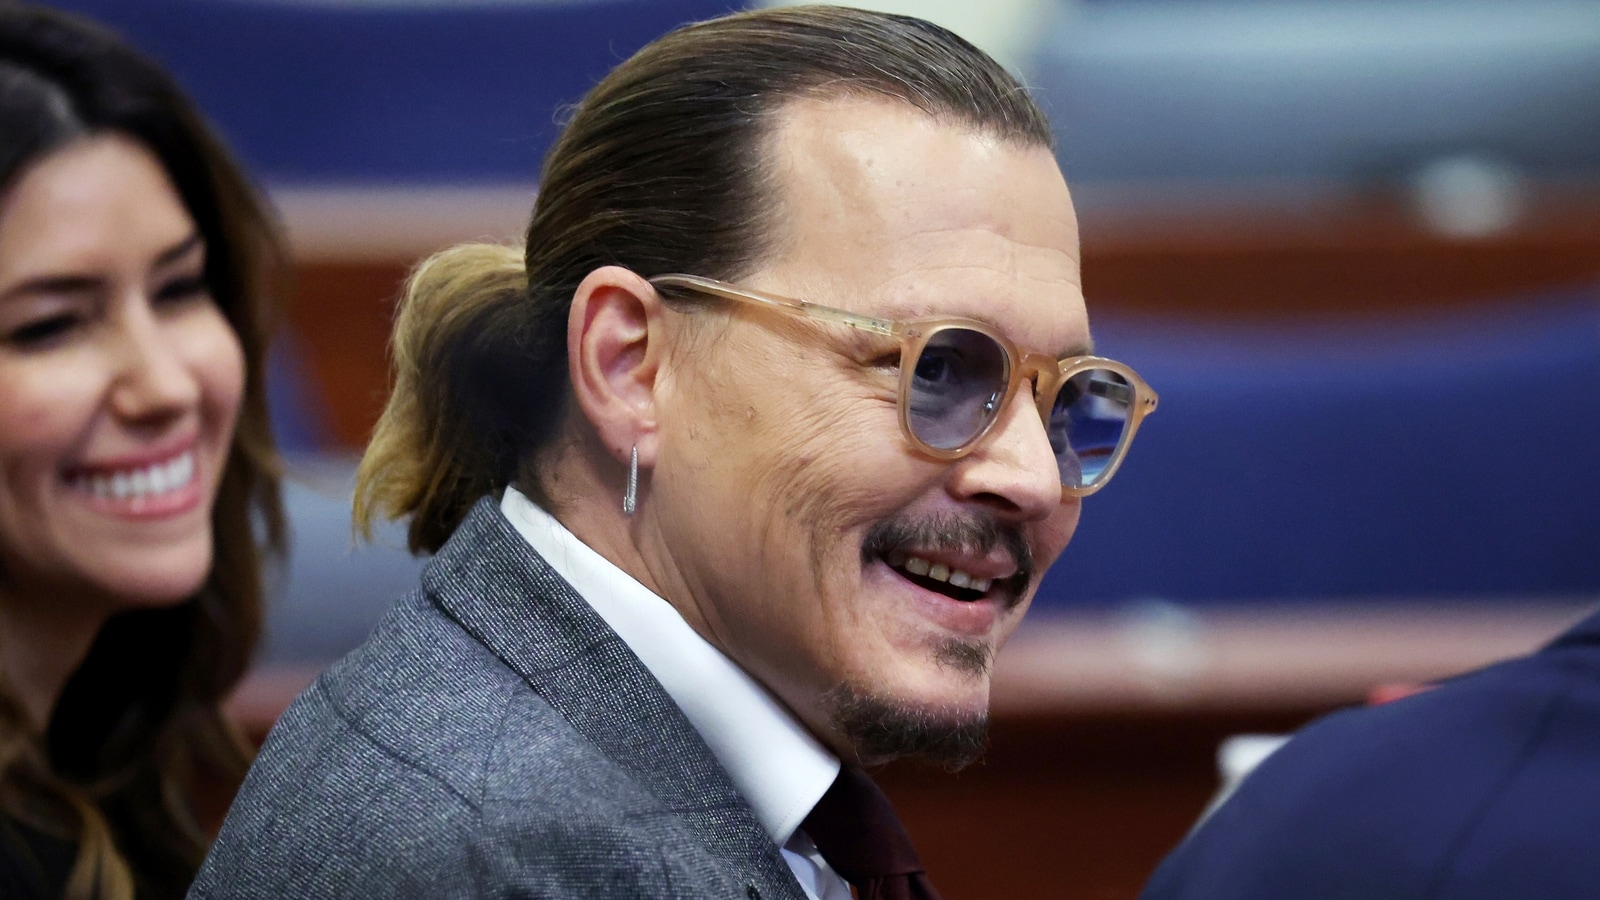 Johnny Depp can’t control his laughter in court as bodyguard is asked about actor’s genitals. Watch